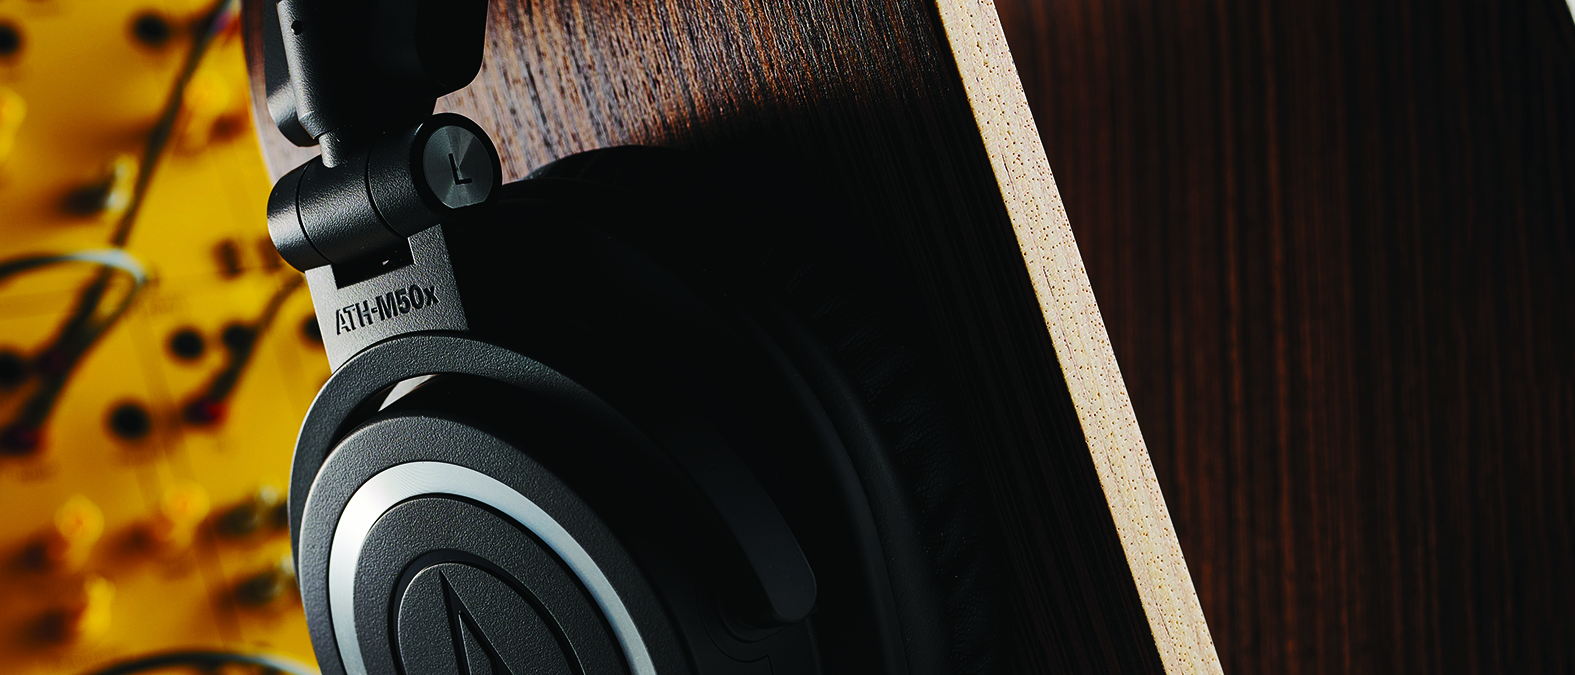 Audio Technica ATH-M50xBT2 review: the only headphones you need for guitar,  studio and everyday use?